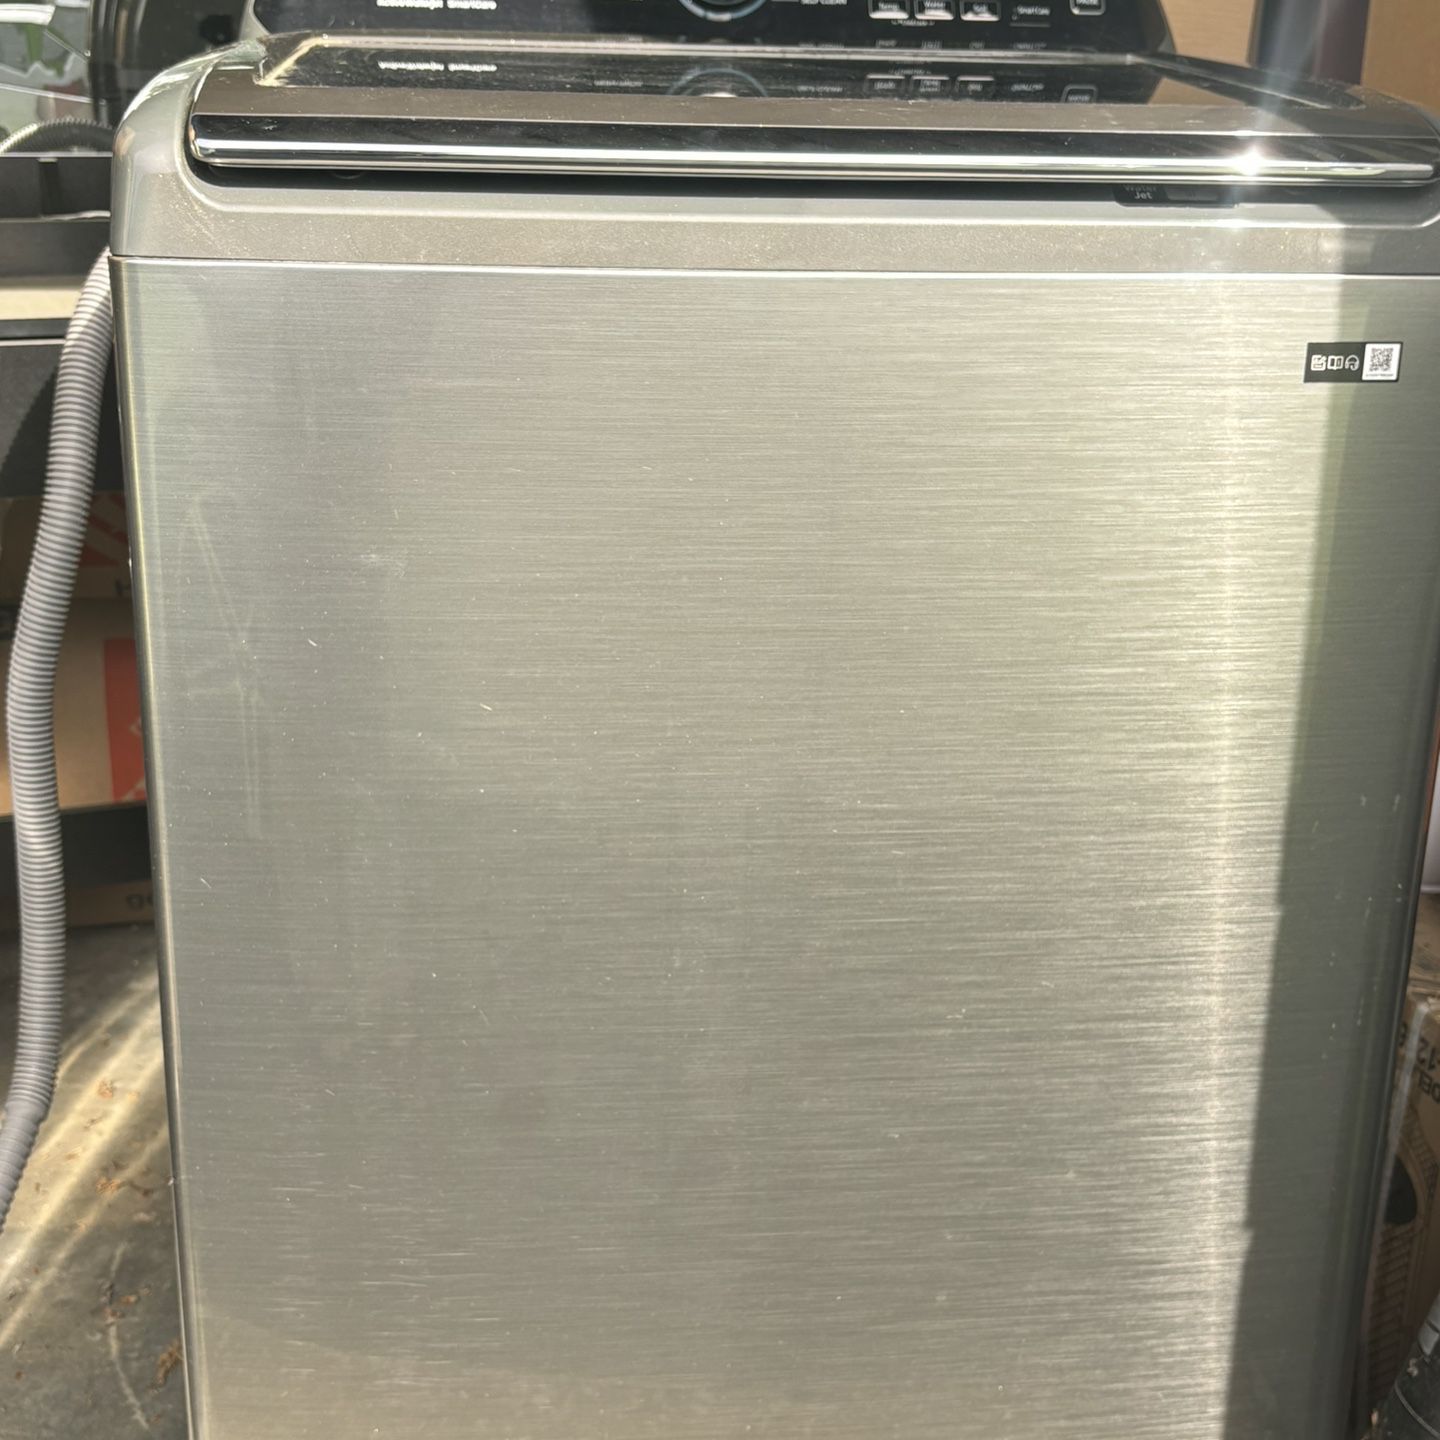 Samsung Washer and Dryer Set (Great Condition)